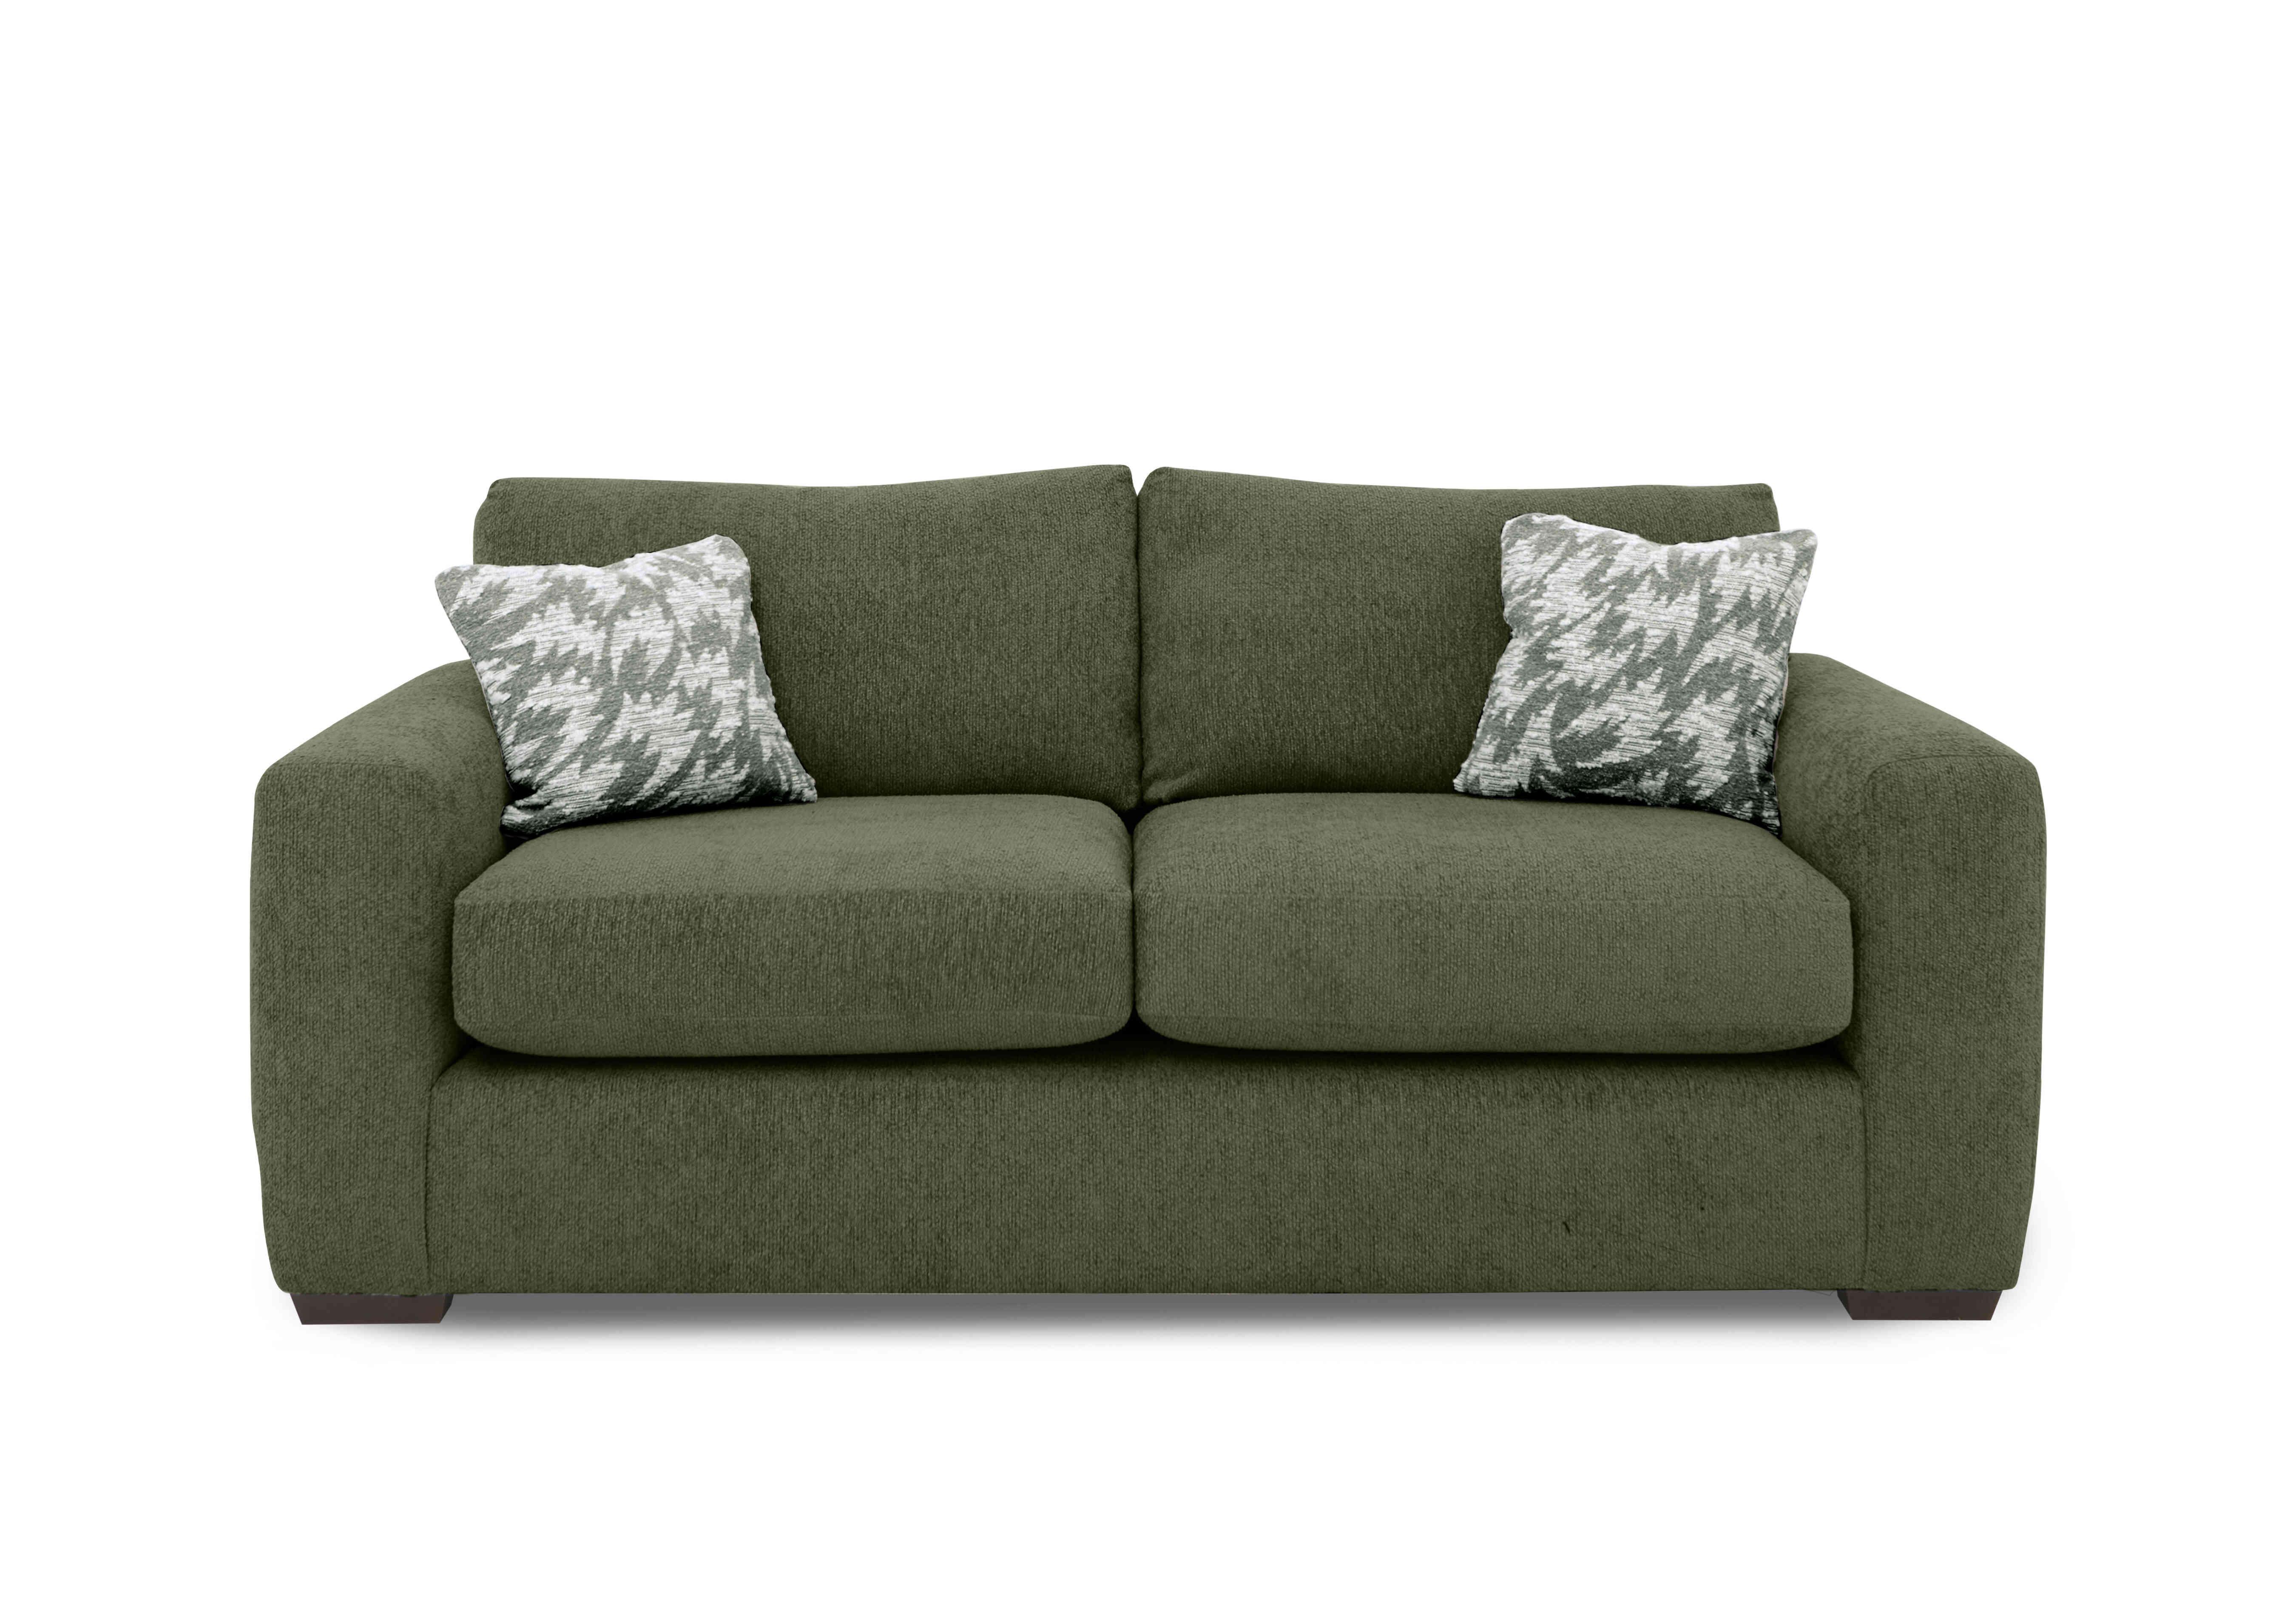 Harper 3 Seater Classic Back Sofa Bed in Leo Forest on Furniture Village